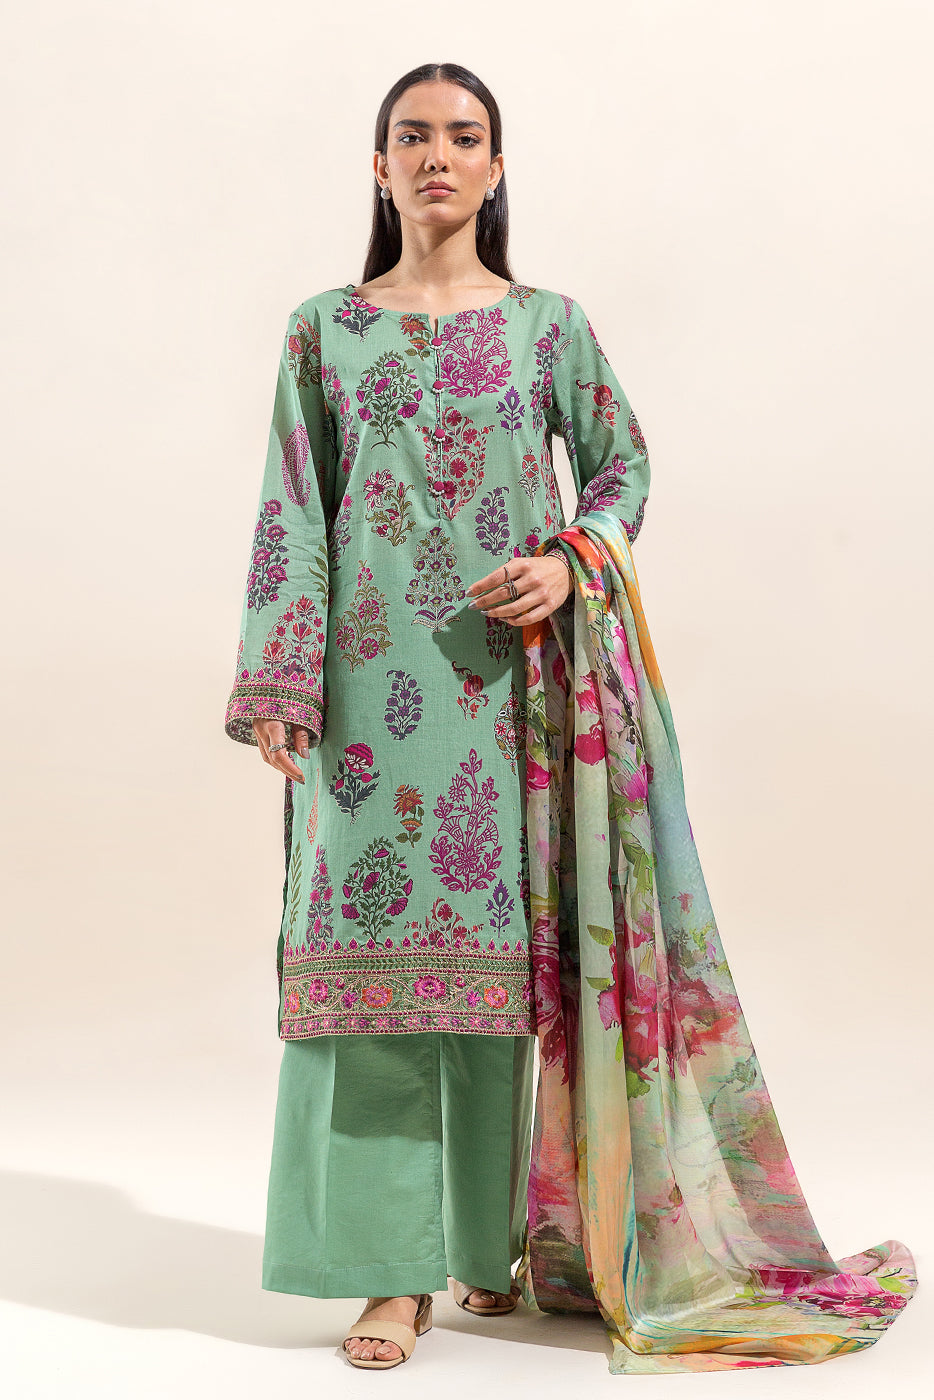 3 PIECE EMBROIDERED LAWN SUIT-DUSKY JADE (UNSTITCHED)